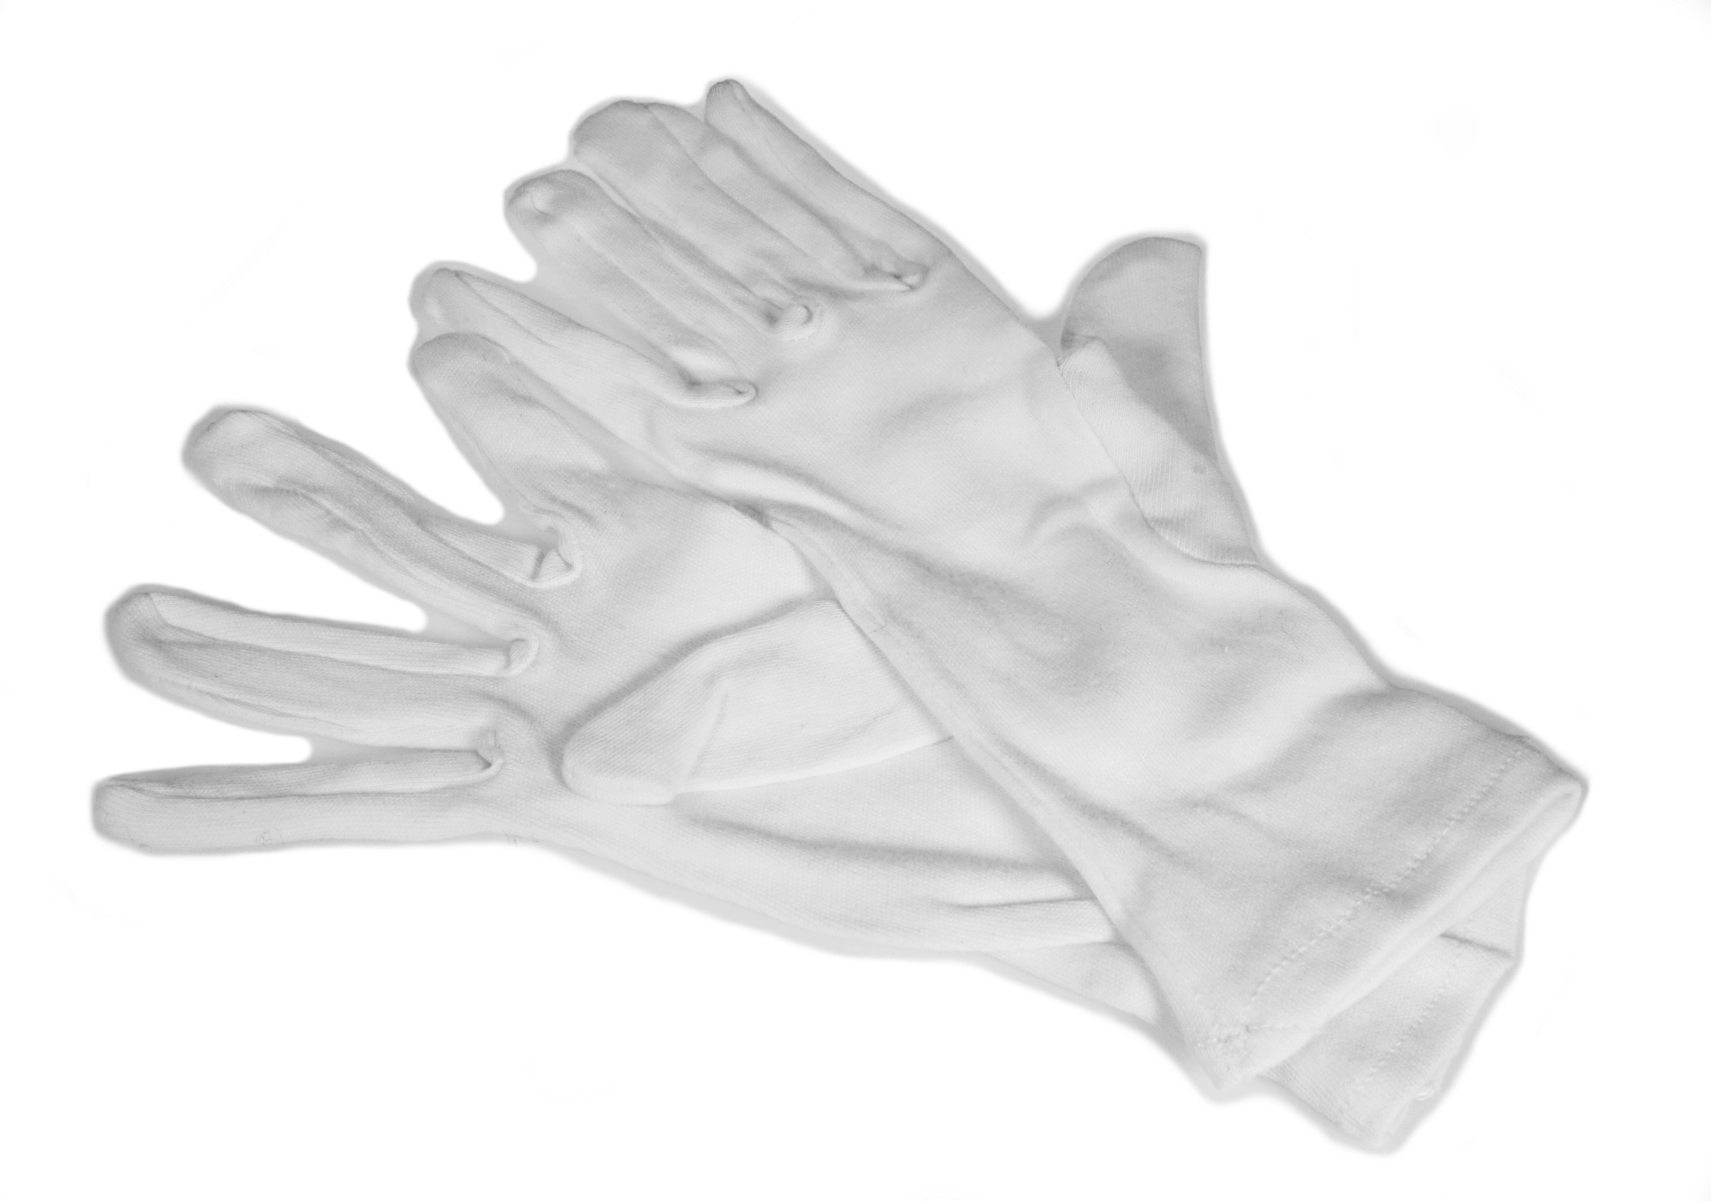 A pair of cotton gloves